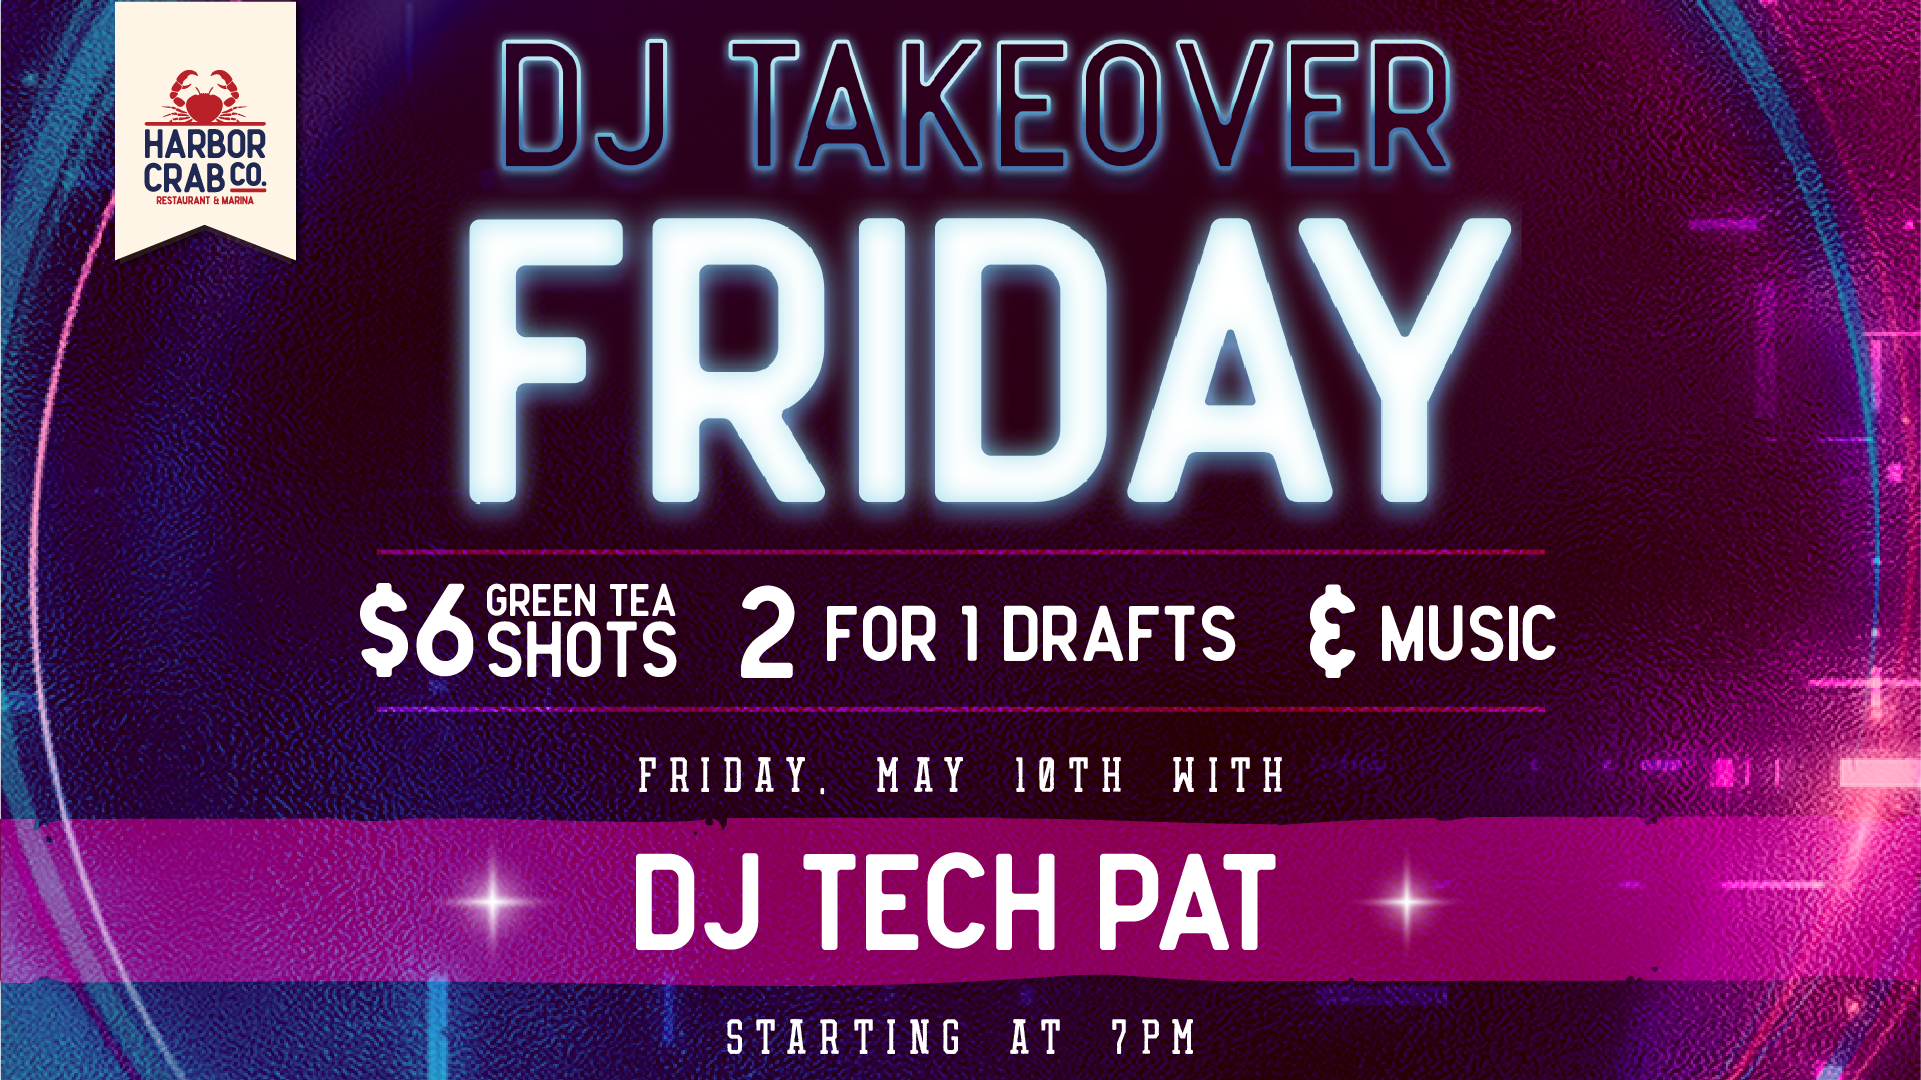 DJ Takeover with DJ Tech Pat at Harbor Crab on May 10th, from 7 pm. Join us for great deals on drinks and live DJ music.